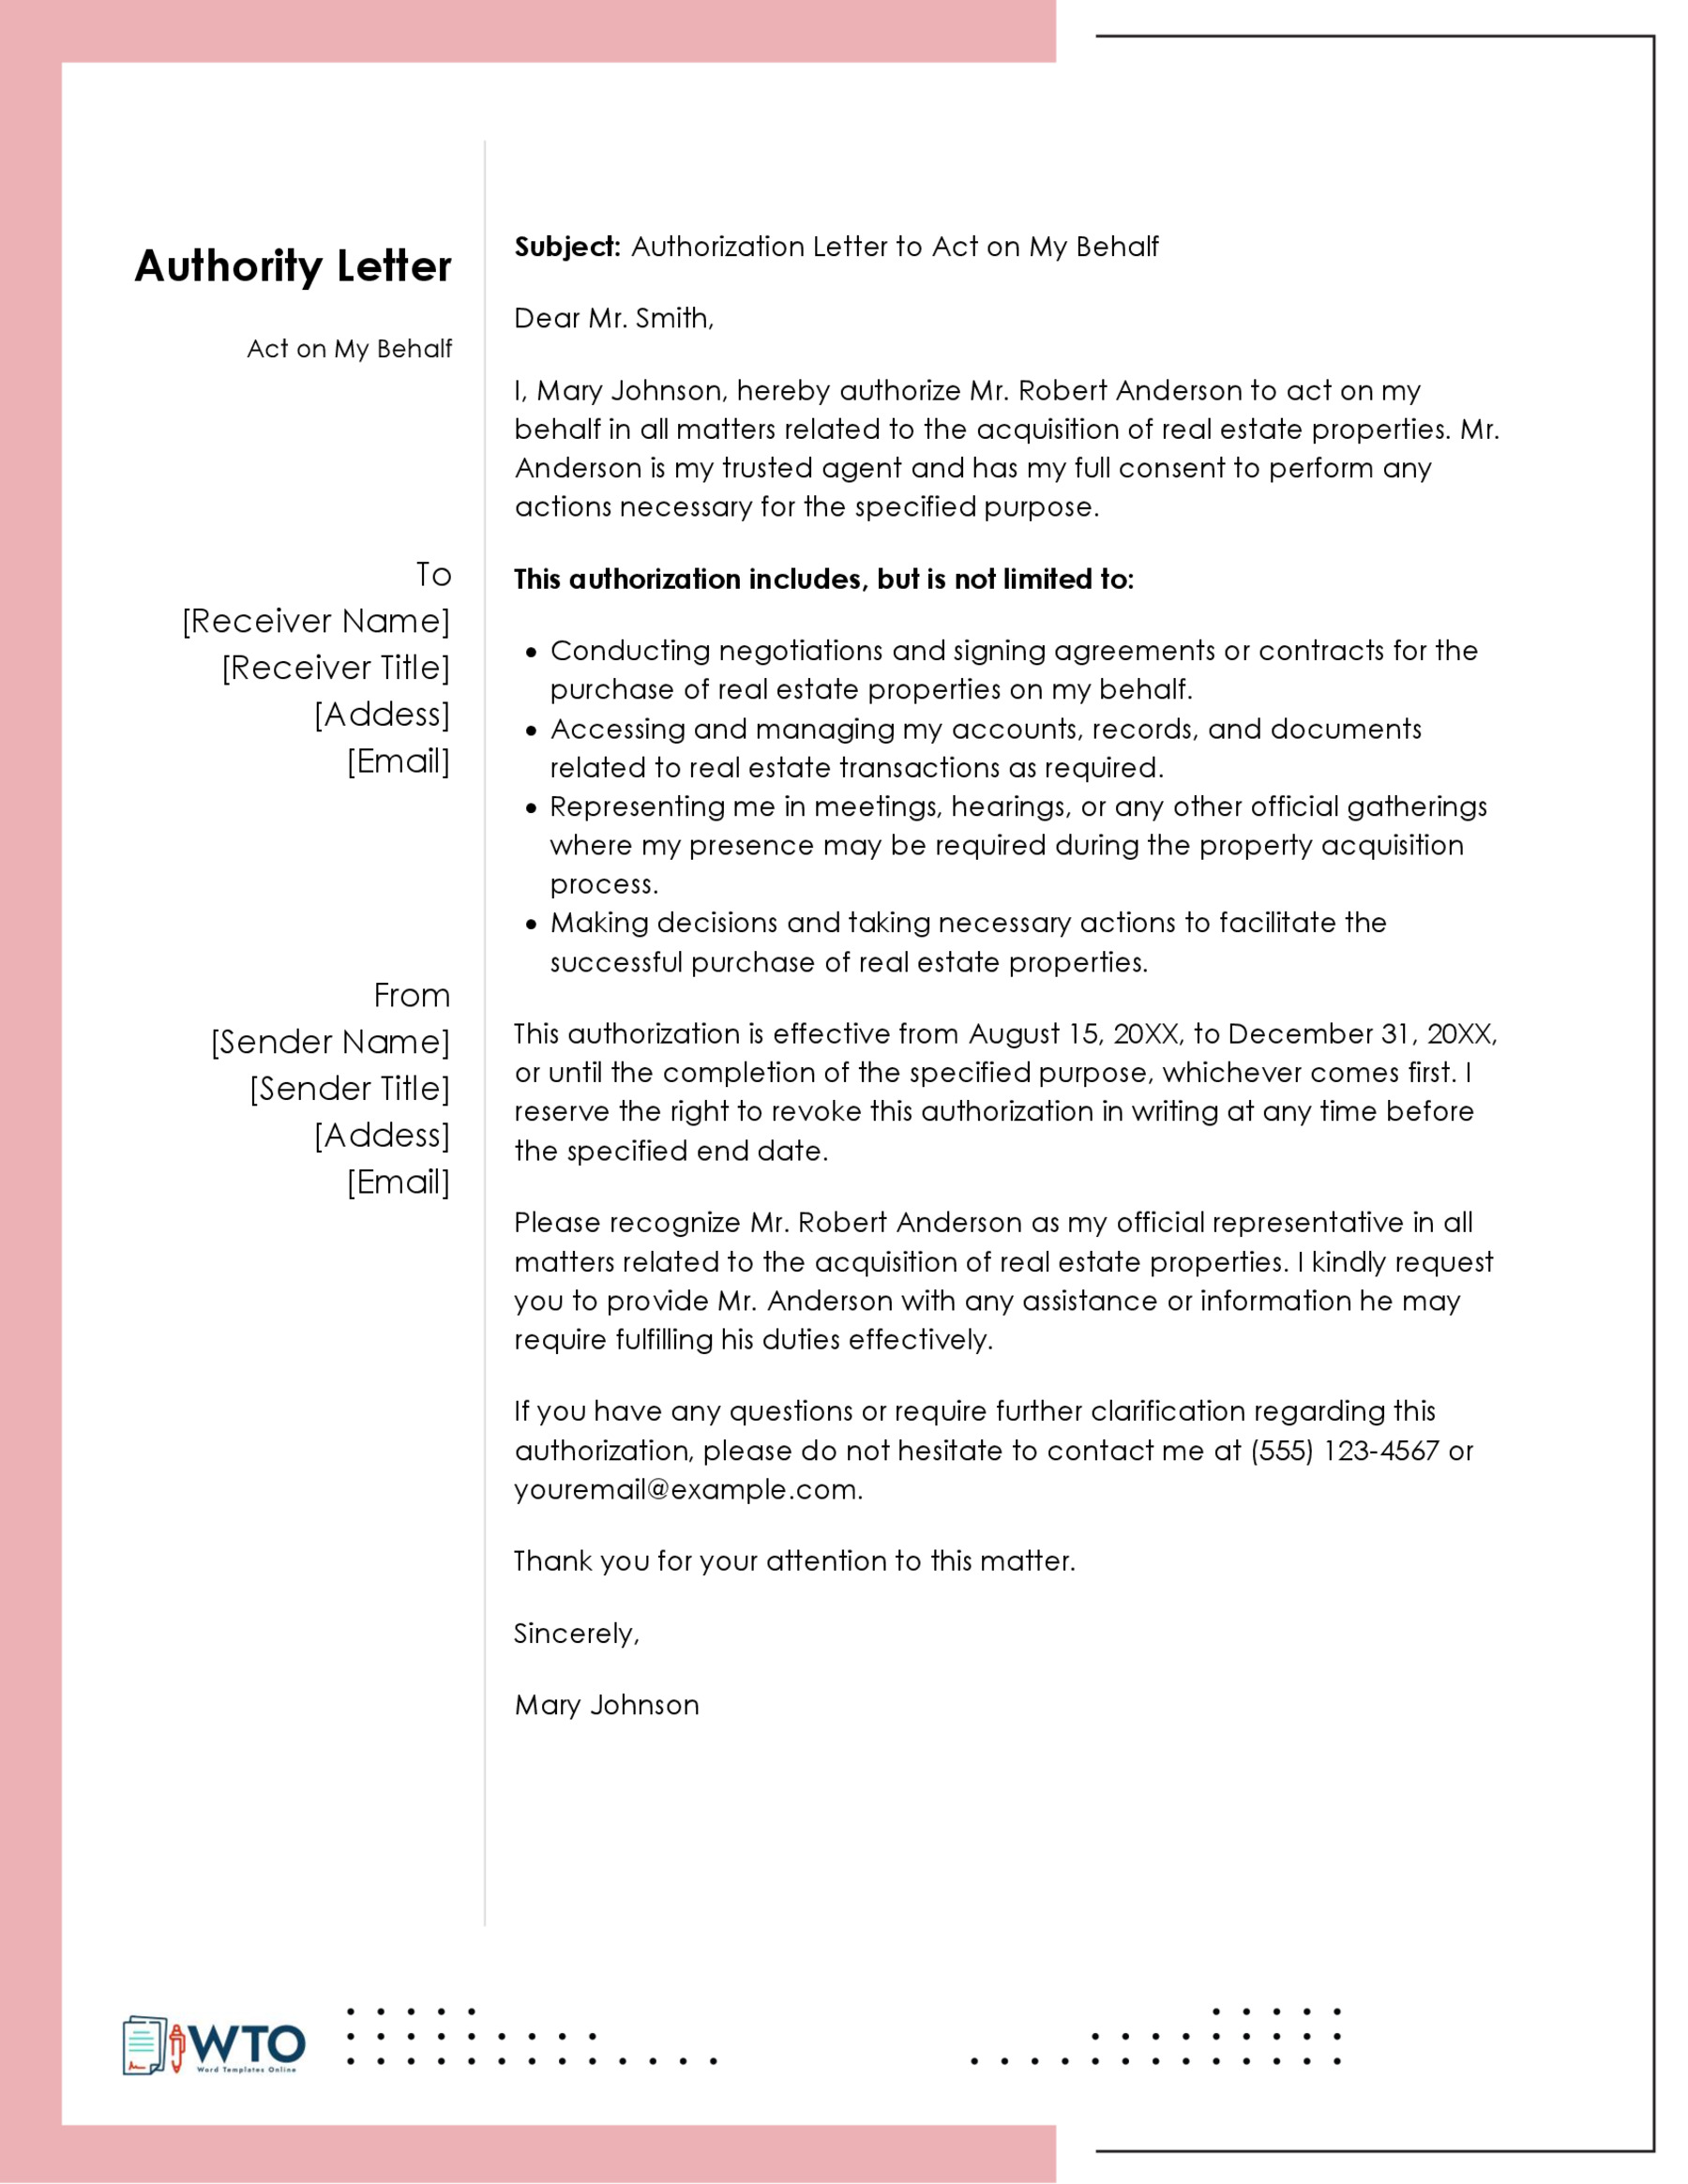 Authorization Letter to act Sample-Free download in ms word